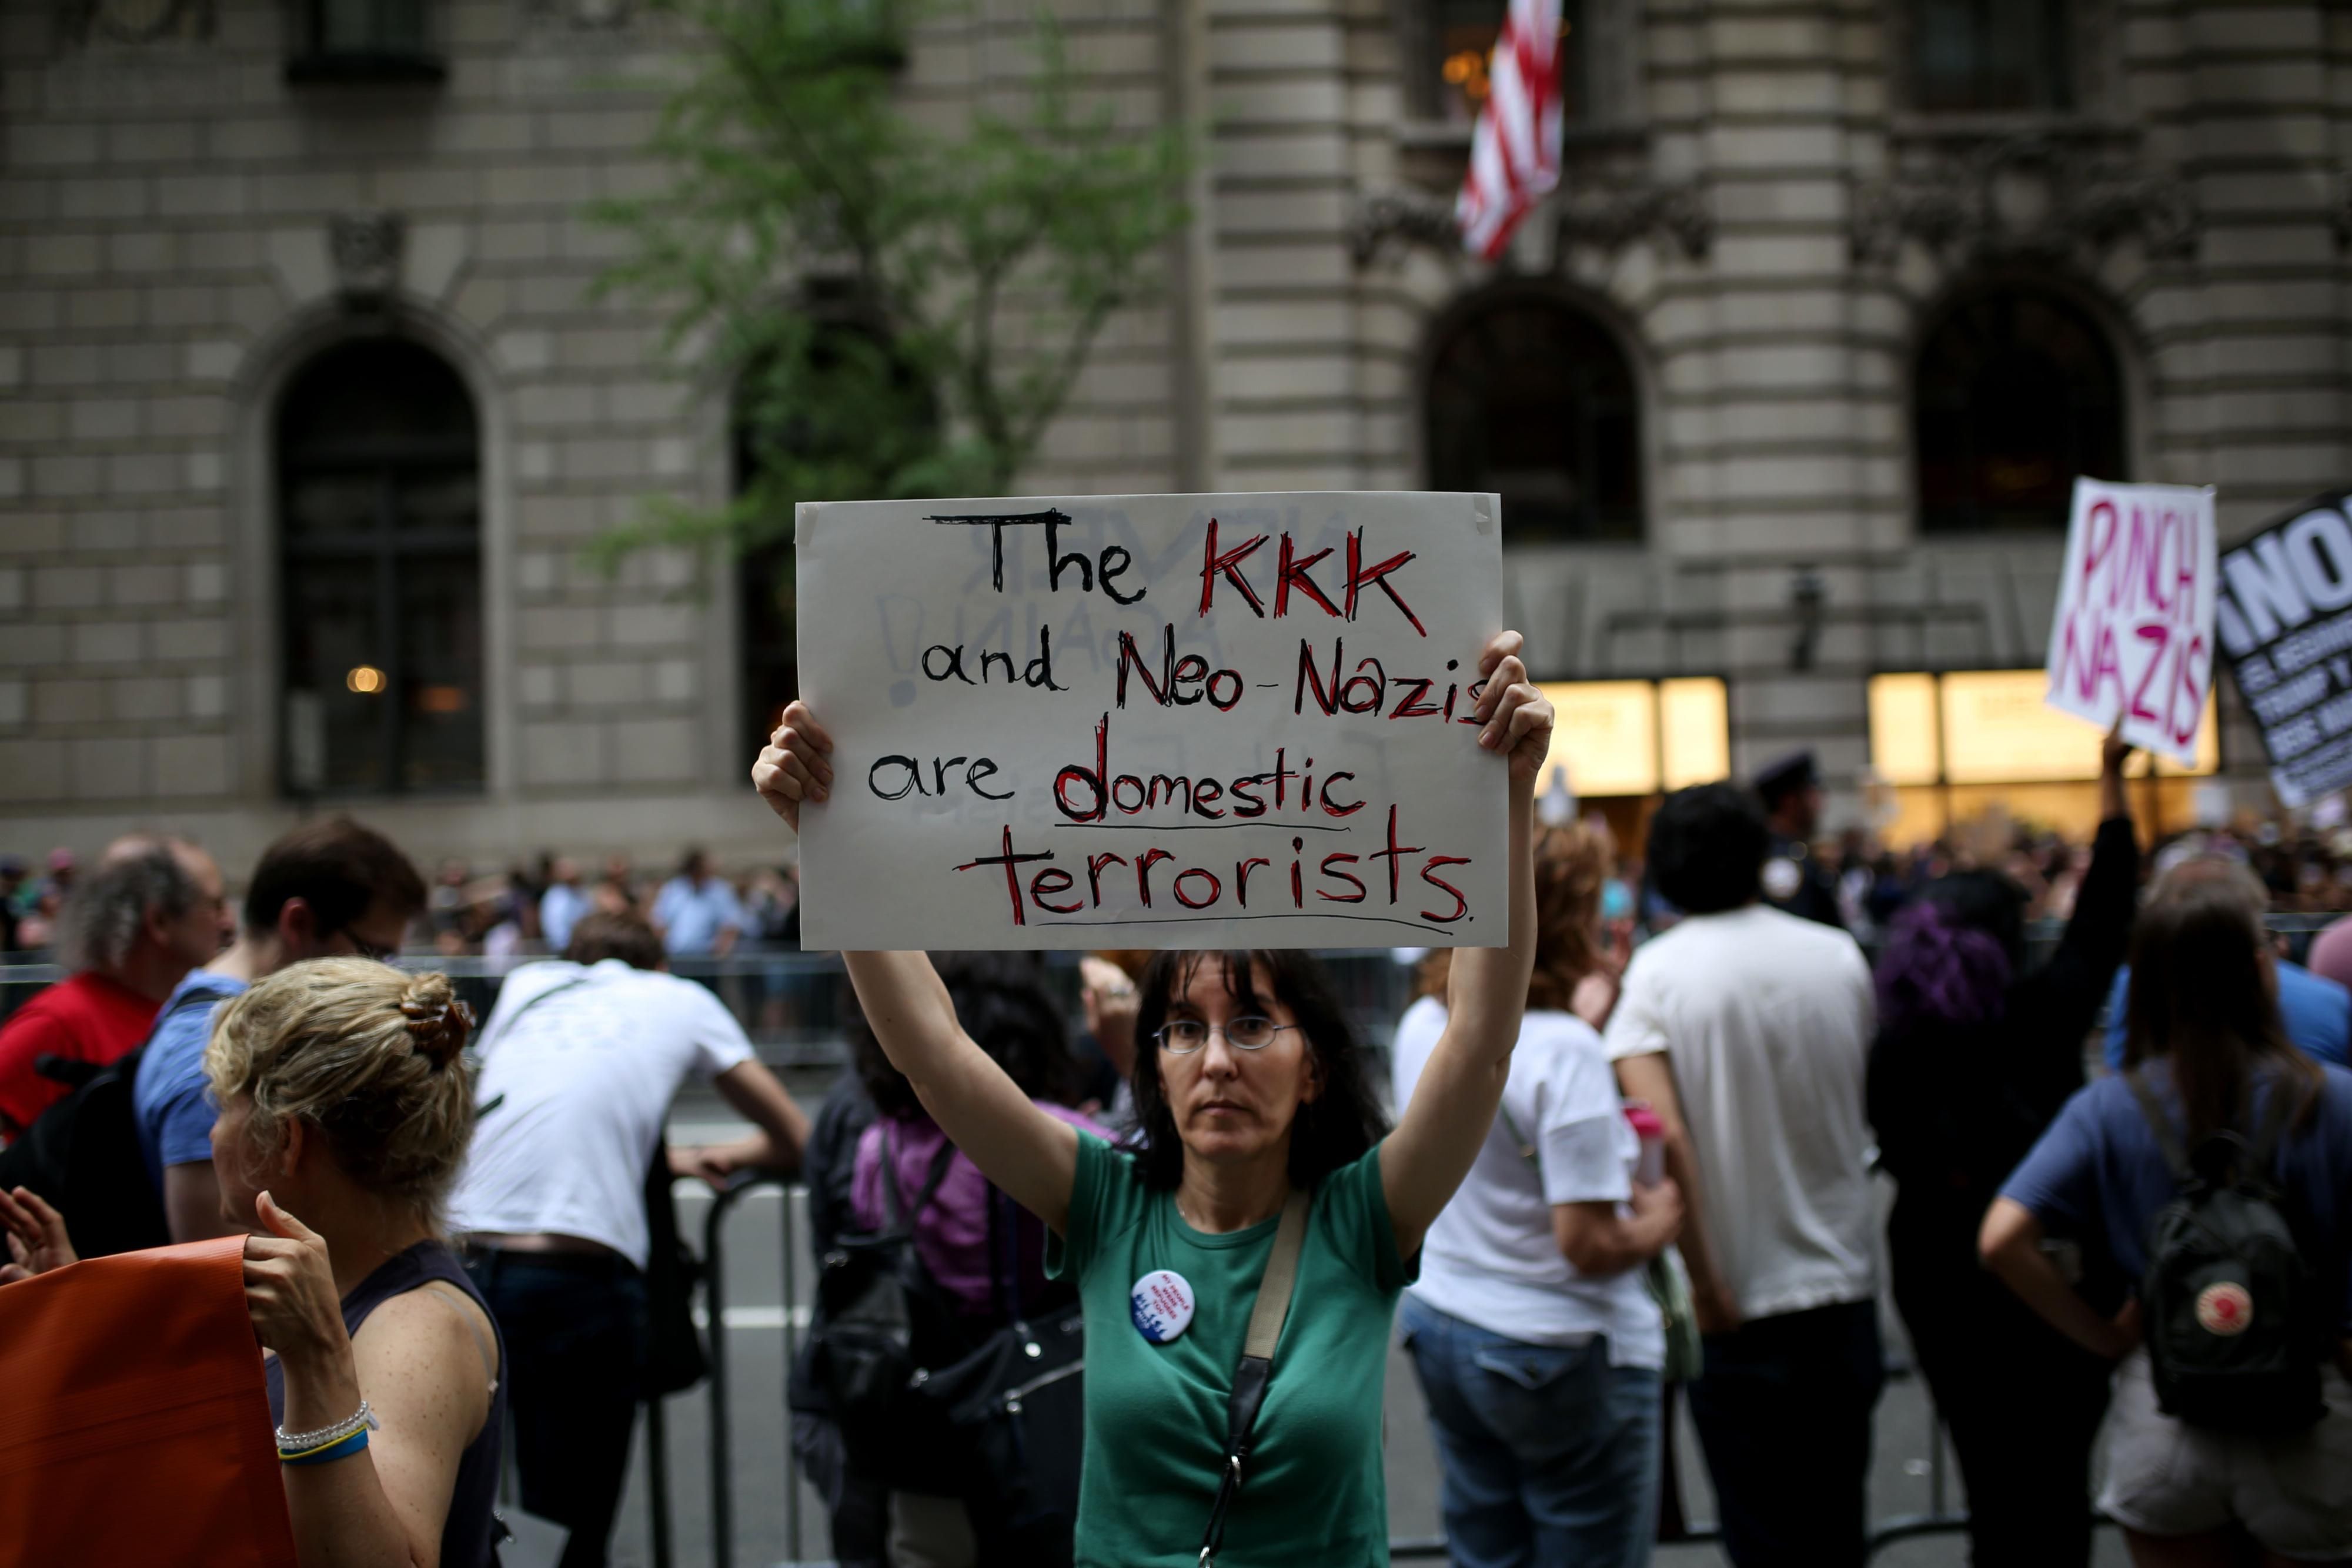 A protester holds a banner reading "The KKK and Neo-Nazis Are Domestic Terrorists" during a rally against then-U.S. President Donald Trump on August 14, 2017 in New York City. (Photo: Mohammed Elshamy/Anadolu Agency via Getty Images)